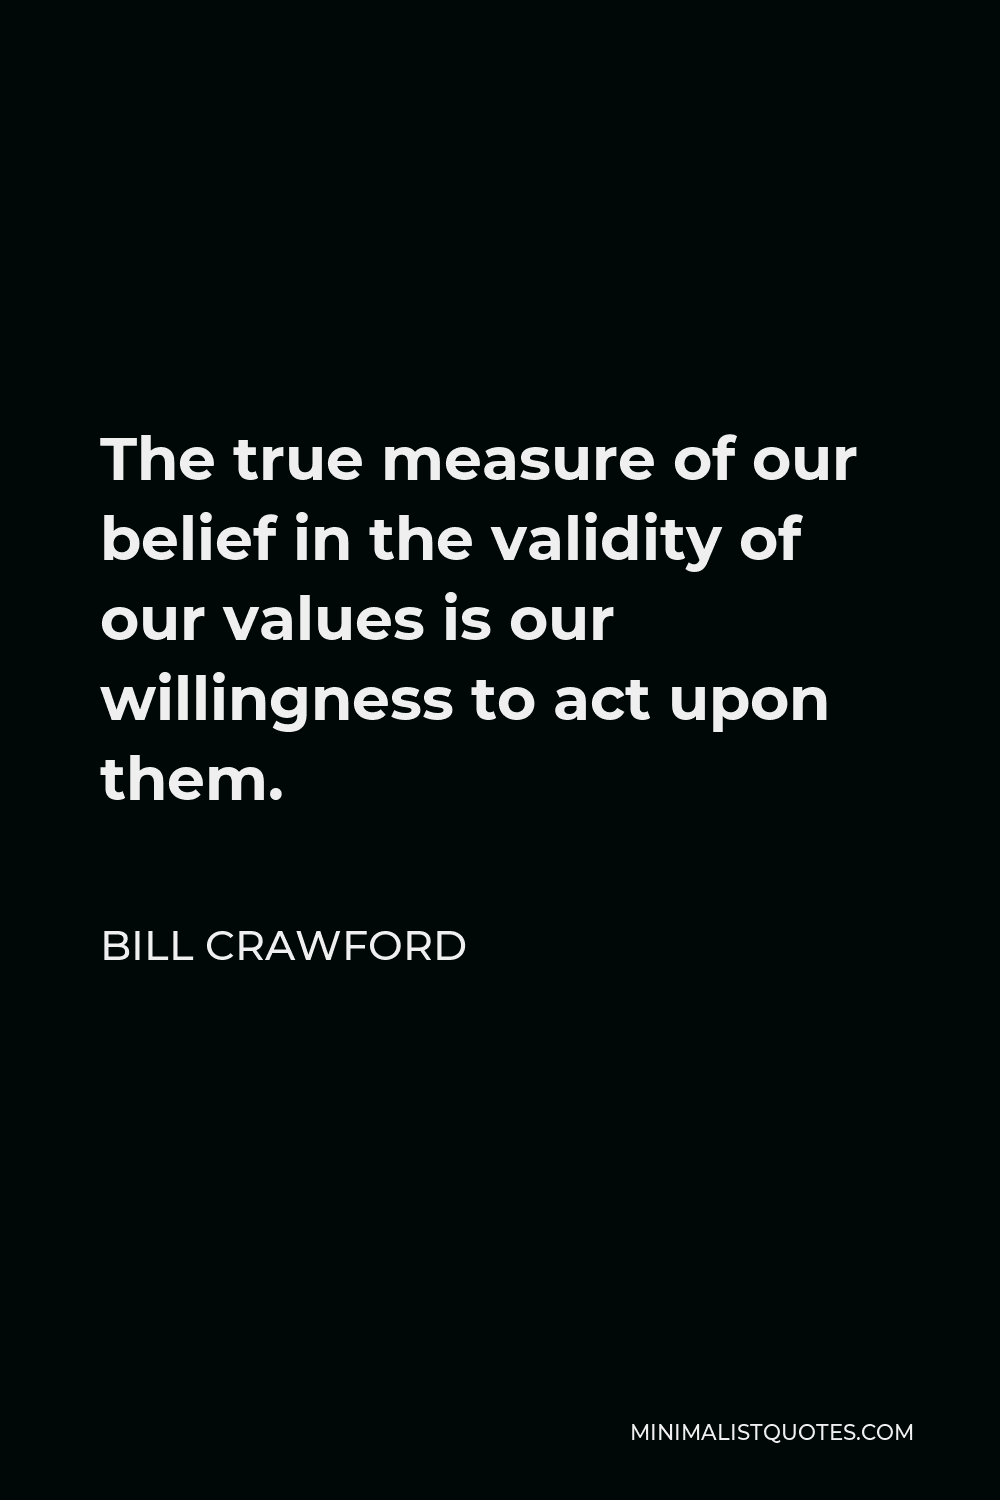 Bill Crawford Quote - The true measure of our belief in the validity of our values is our willingness to act upon them.